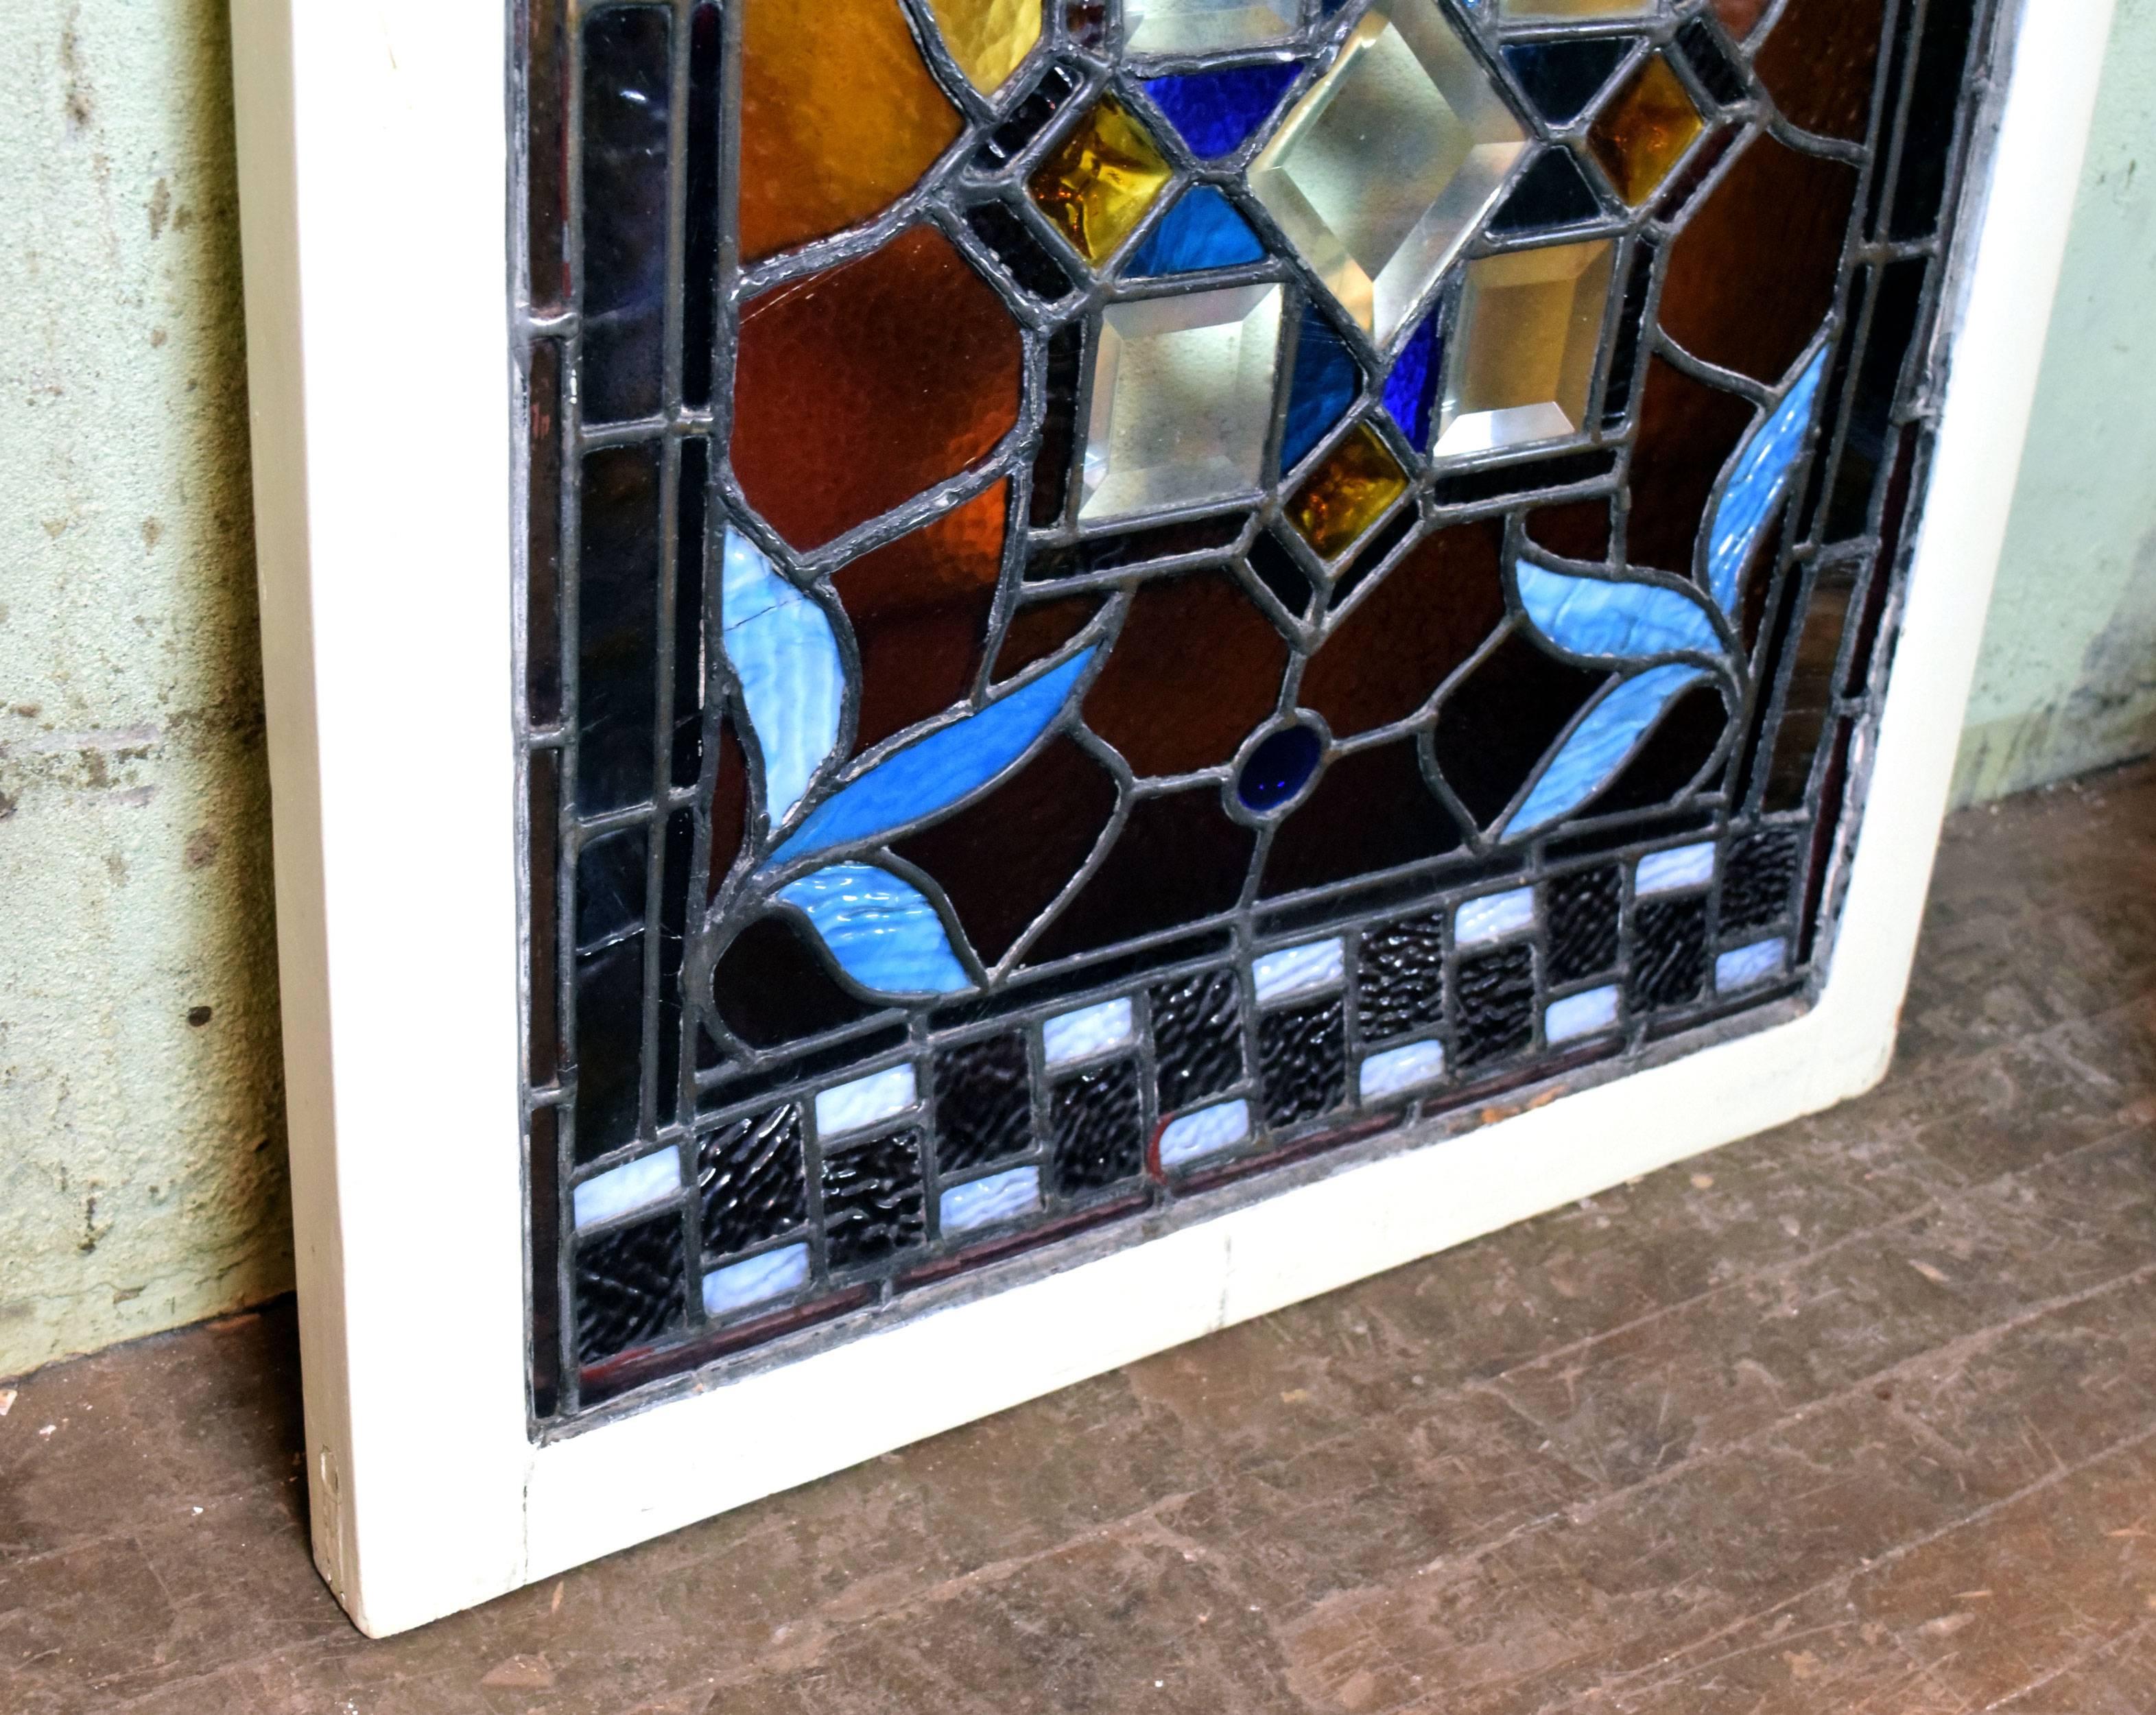 This Victorian window features a central clear beveled square motif. Gold, amber, blue and violet colors accent the sweet, simple design. A unique, one-of-a-kind window!